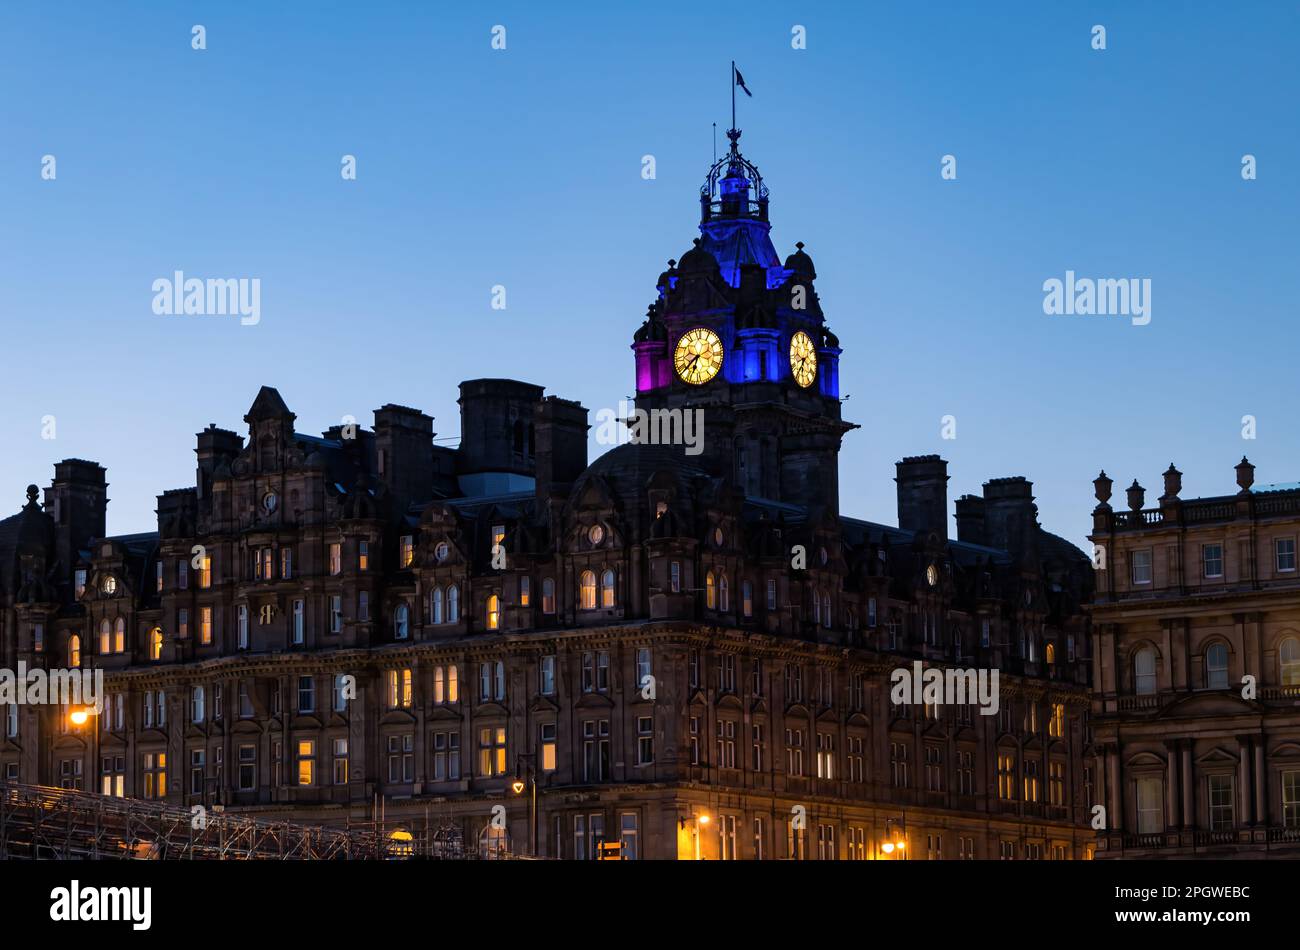 Balmoral Hotel clock tower lit up at dusk or twilight with a clear sky, Edinburgh, Scotland, UK Stock Photo